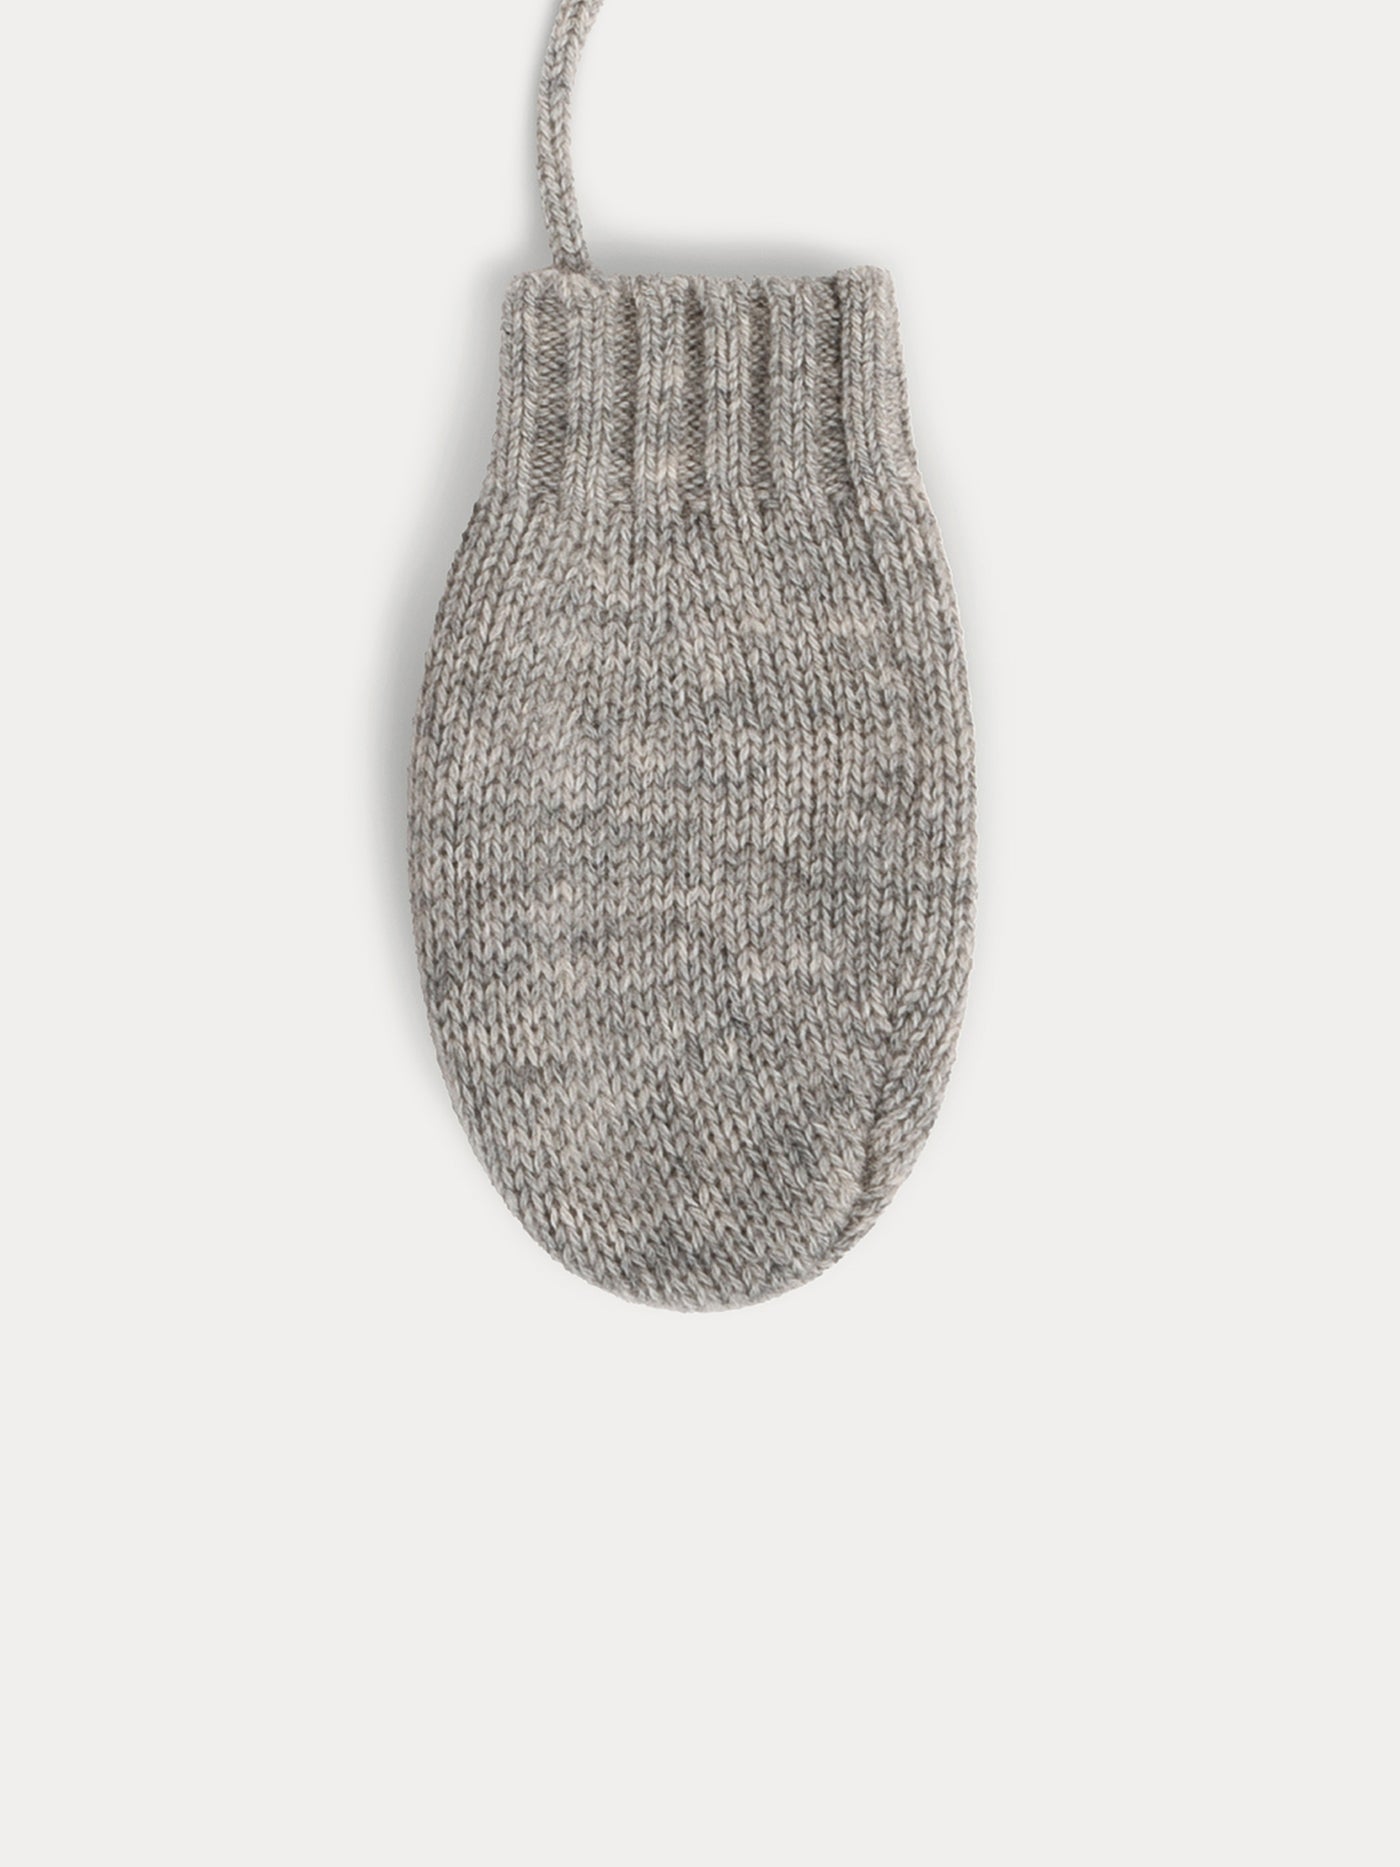 Babies' mittens heathered gray